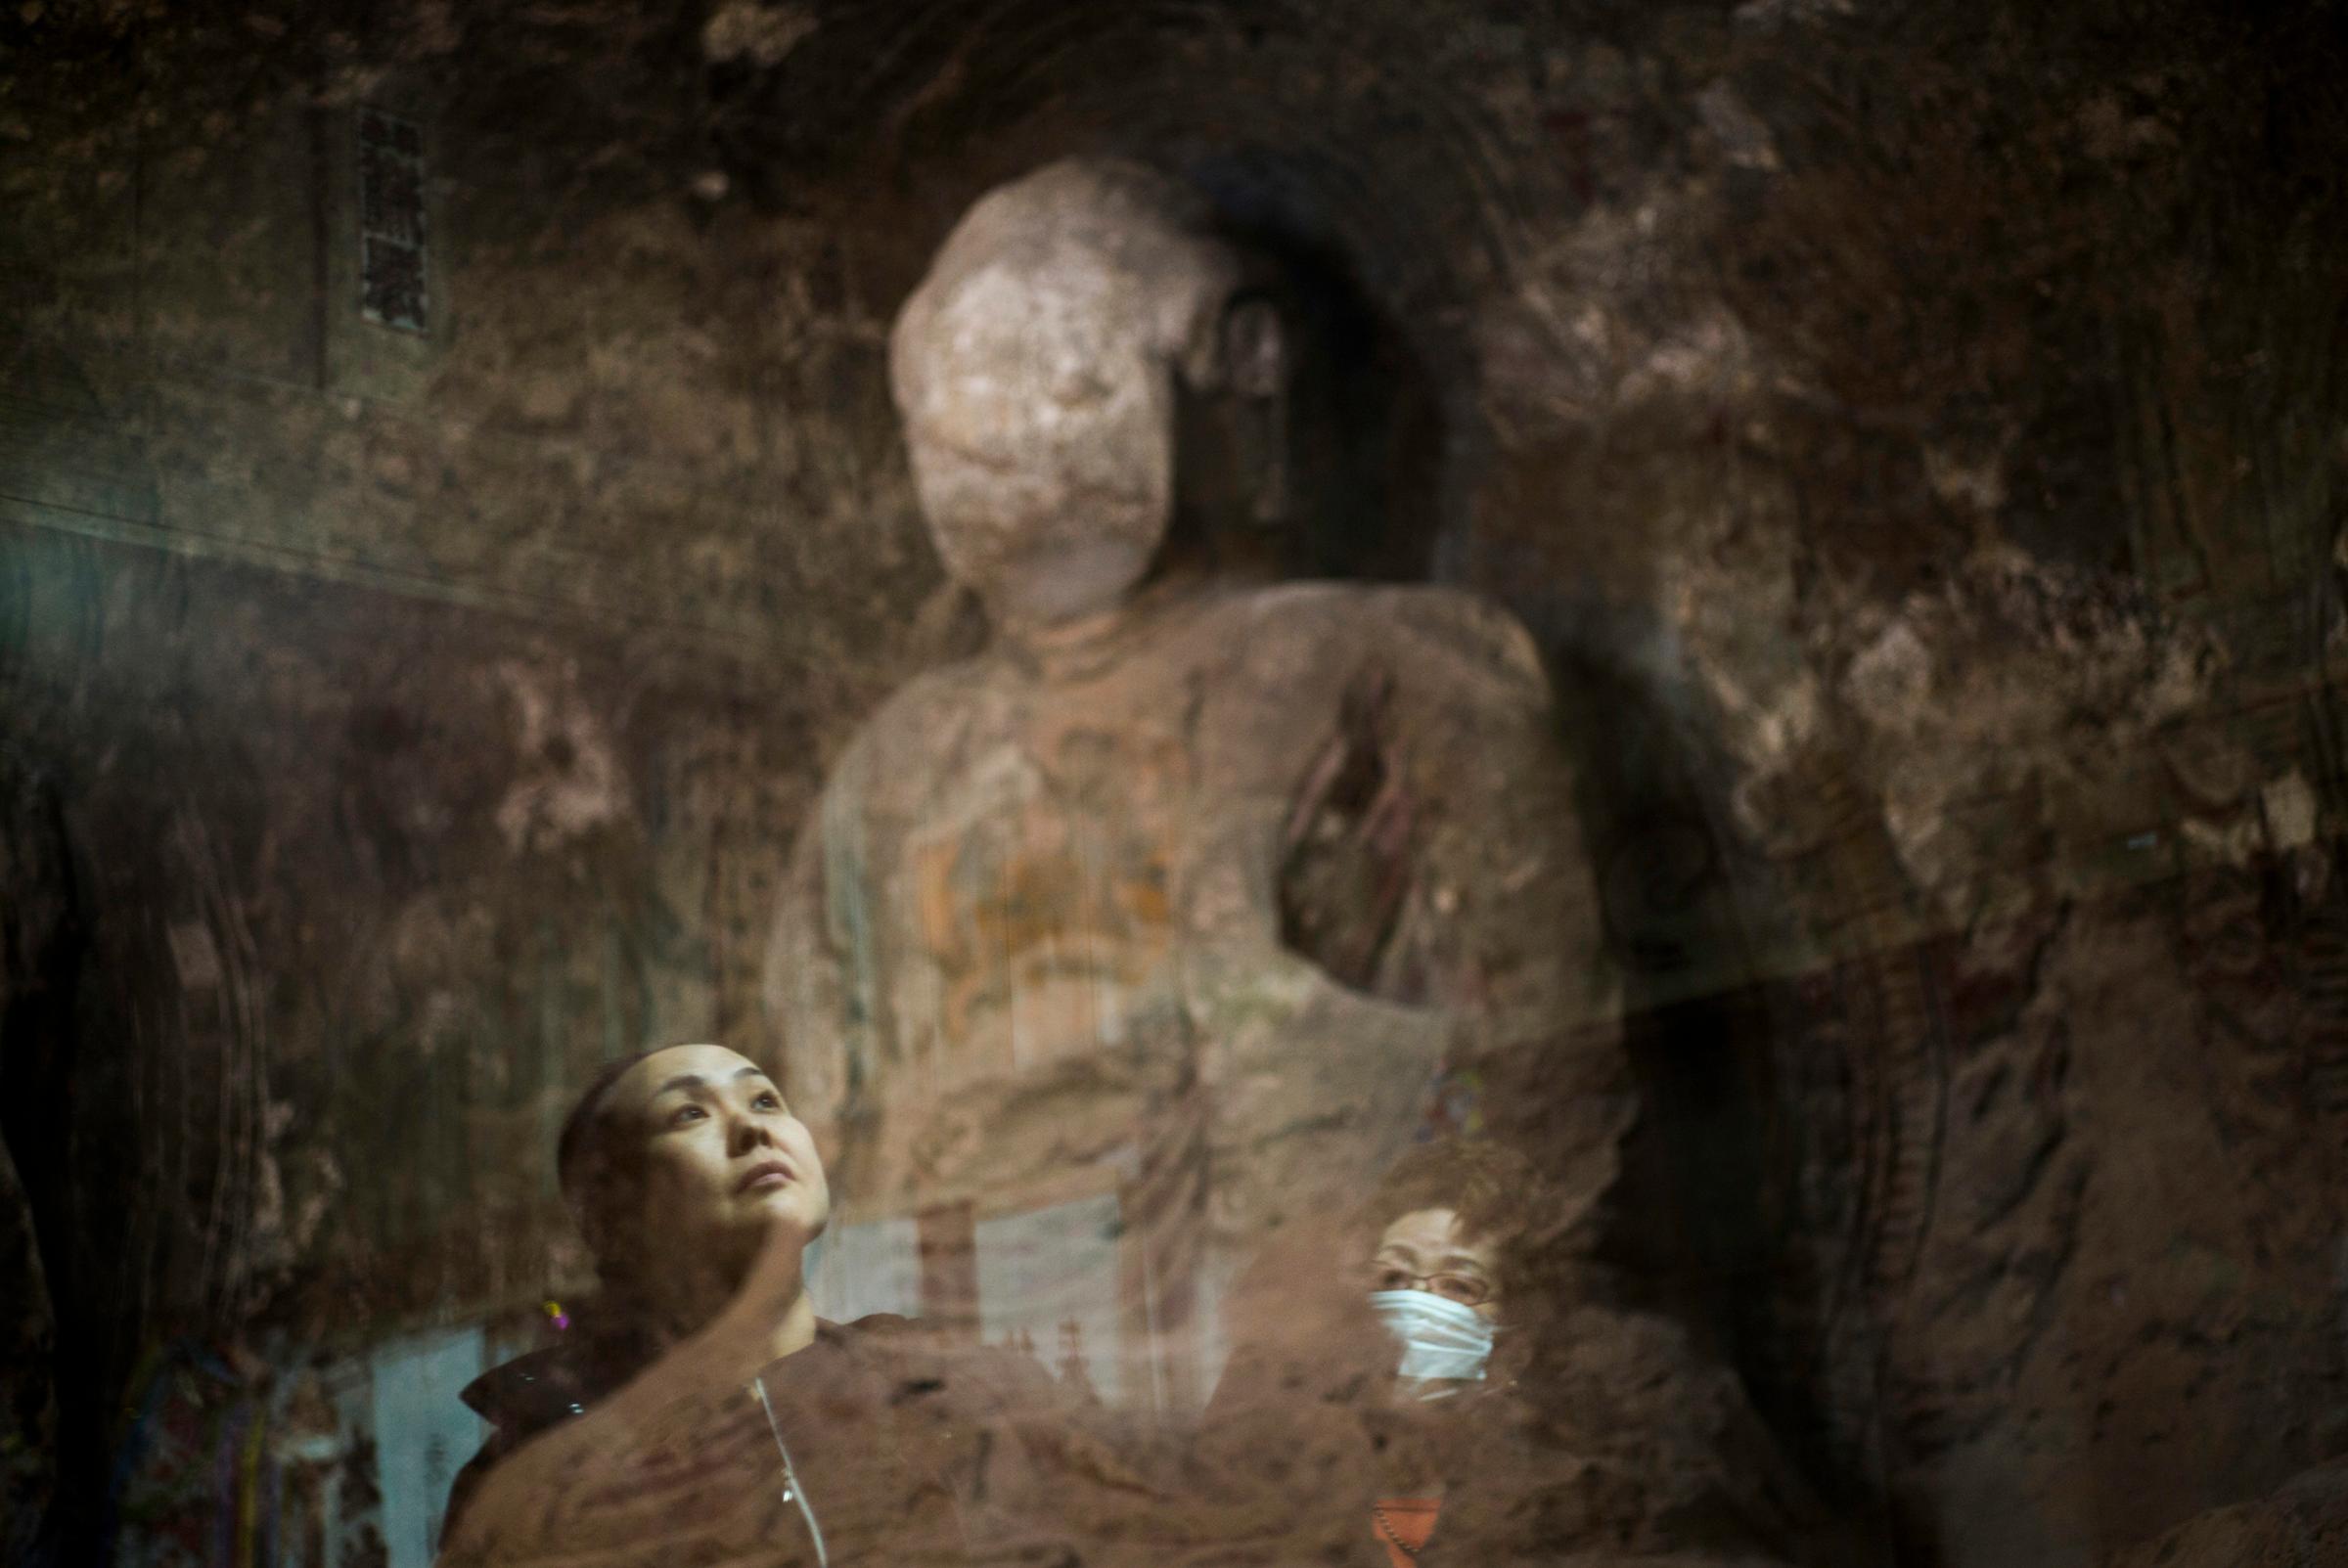 Sachie Matsumoto, 43, and her mother look up at a Buddha statue called “Daihisan no Sekibutsu,” or “Stone Buddha statue of mountain of great sadness,” carved more than 1,000 years ago and situated inside the 20km exclusion zone, Osaka, Japan, March 6, 2016. Sachie would come here as a child.